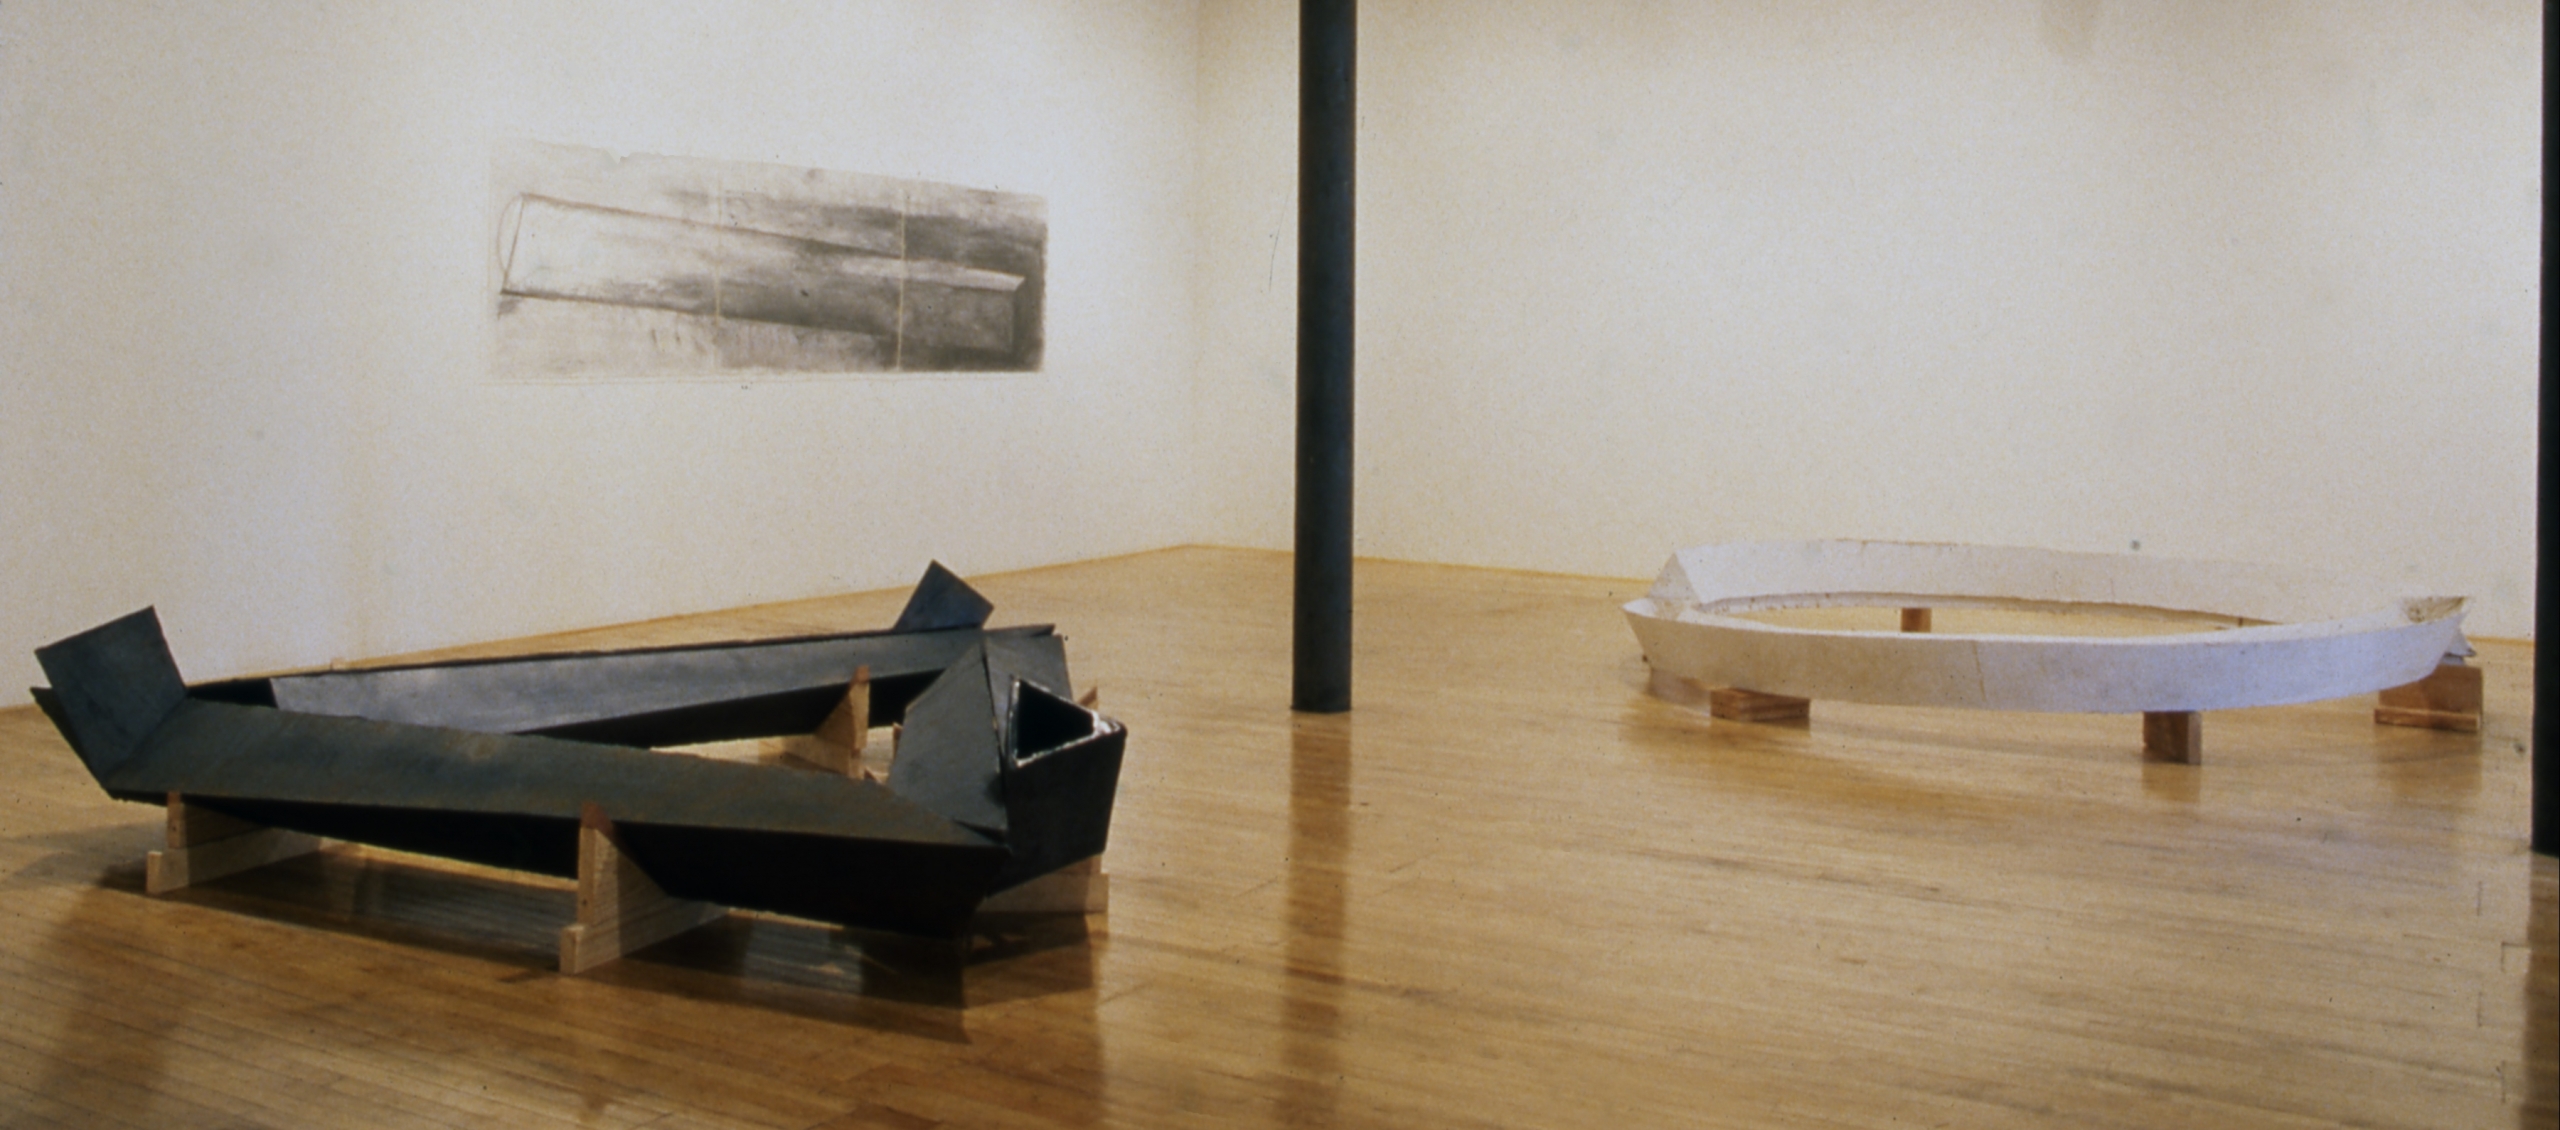 Installation view at Rhona Hoffman Gallery, Bruce Nauman, New Iron Casting, Plaster, and Drawing, 1981